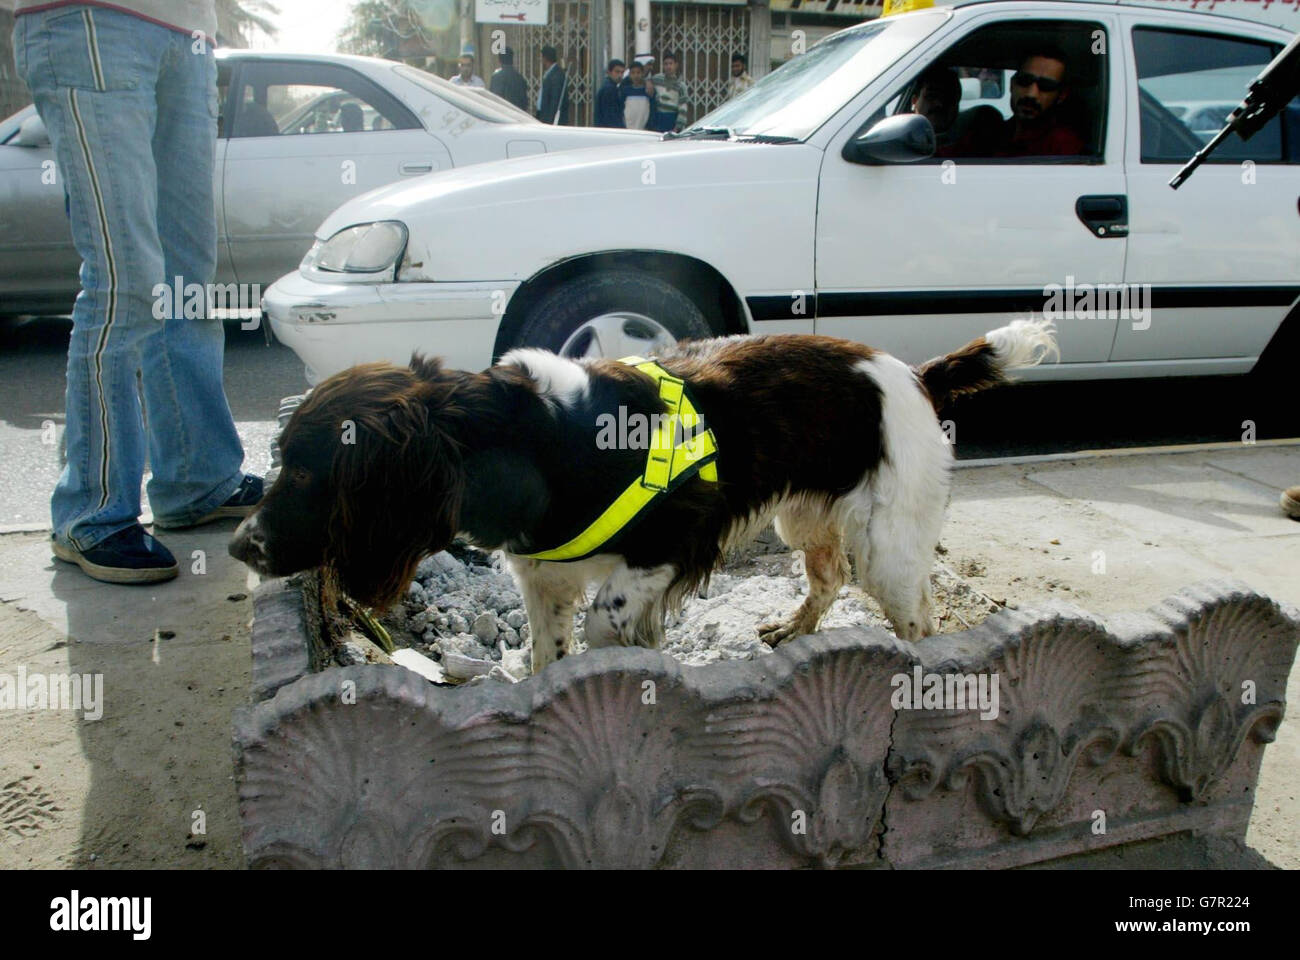 Poppy, a search dog helps the Royal Engineer High Risk Search team search cars in Basra after three Iraqi soldiers were killed in a motorcycle bomb attack in the city earlier. The booby-trapped vehicle exploded close to the Old State Buildings, in the Al-Hussein district, shortly before 8am local time, as troops carried out patrols. British quick-response teams have been sent to the scene and bomb disposal experts are arriving to examine the device. Stock Photo